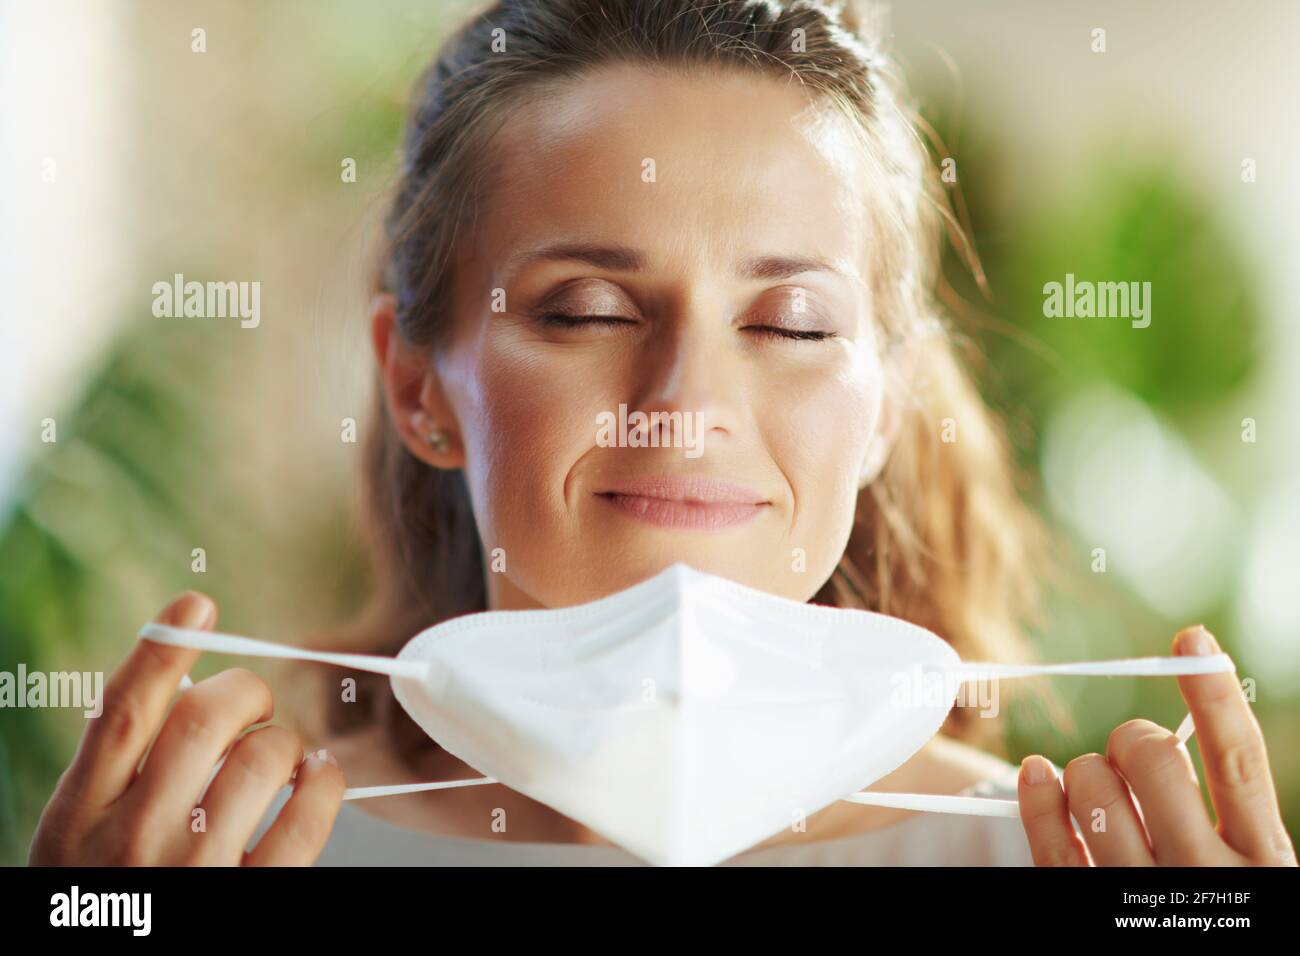 covid-19 pandemic. Portrait of relaxed trendy female in grey blouse taking off ffp2 mask. Stock Photo